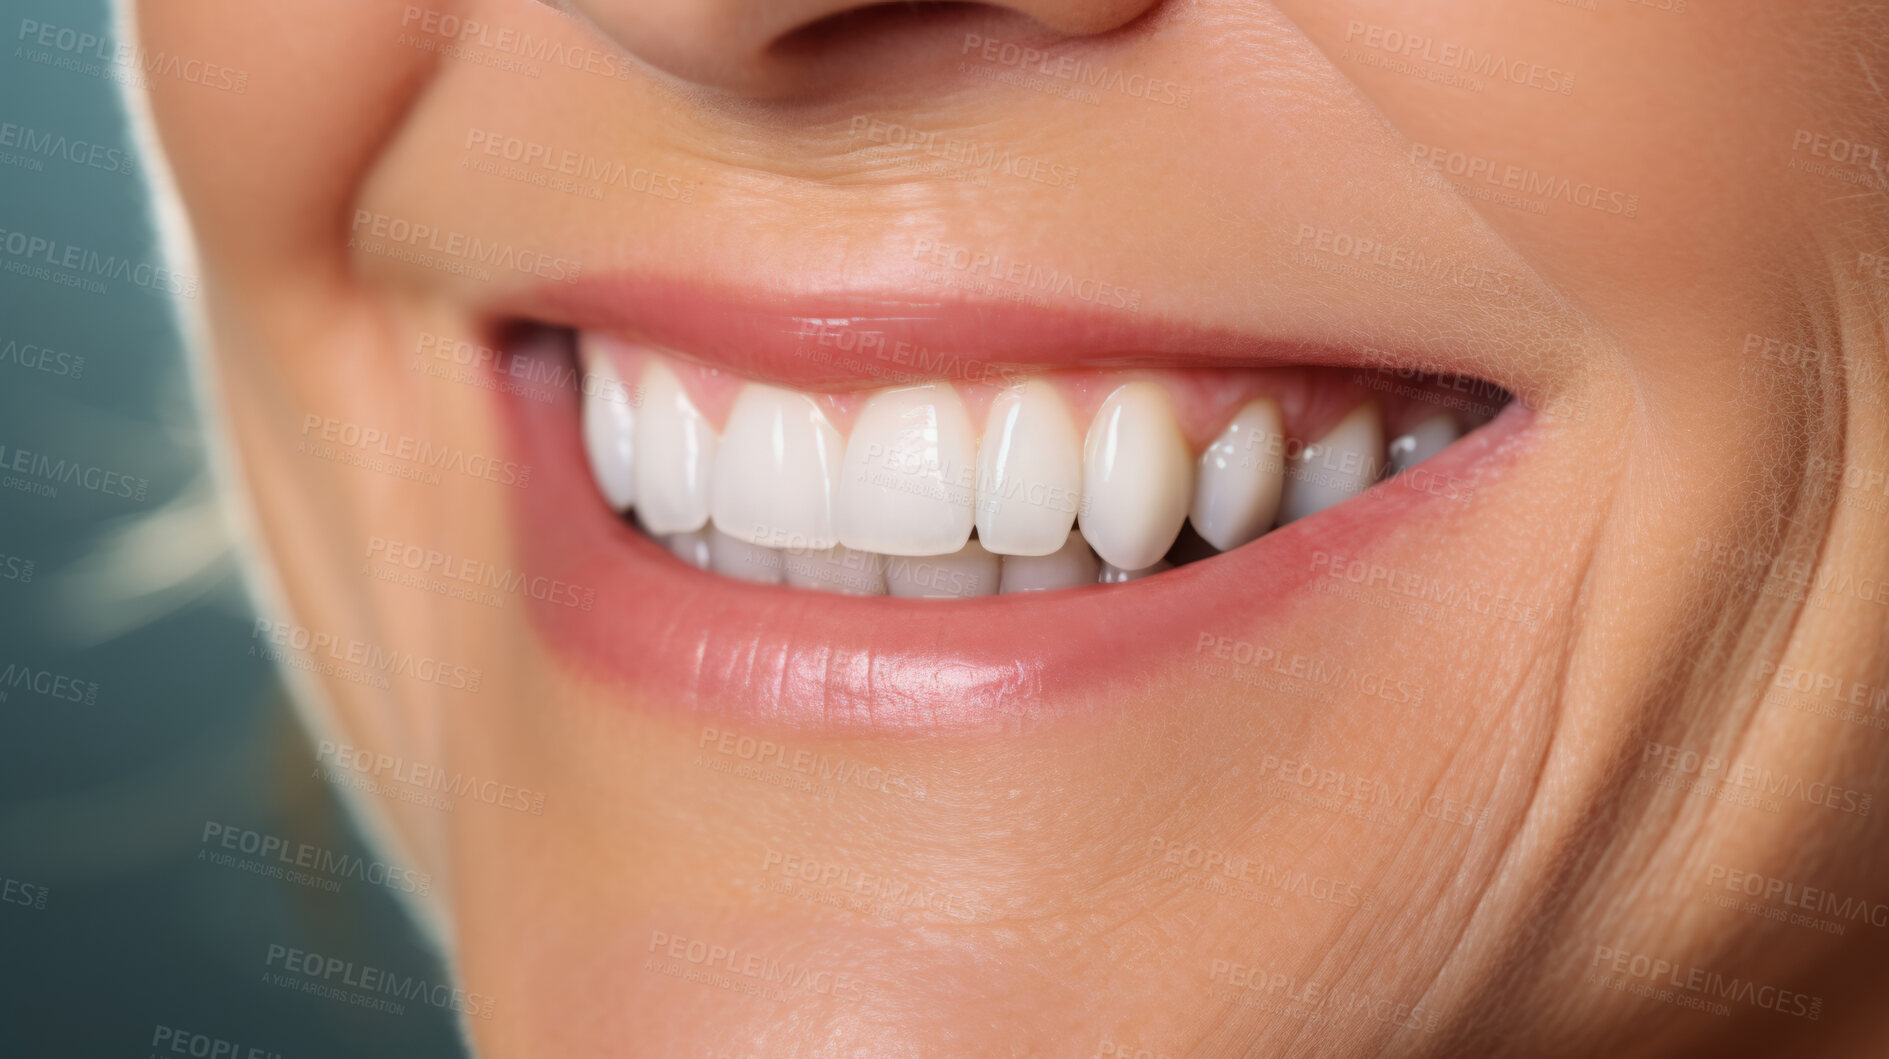 Buy stock photo Closeup of smile with white teeth. Dental care, teeth whitening procedure at dentist.